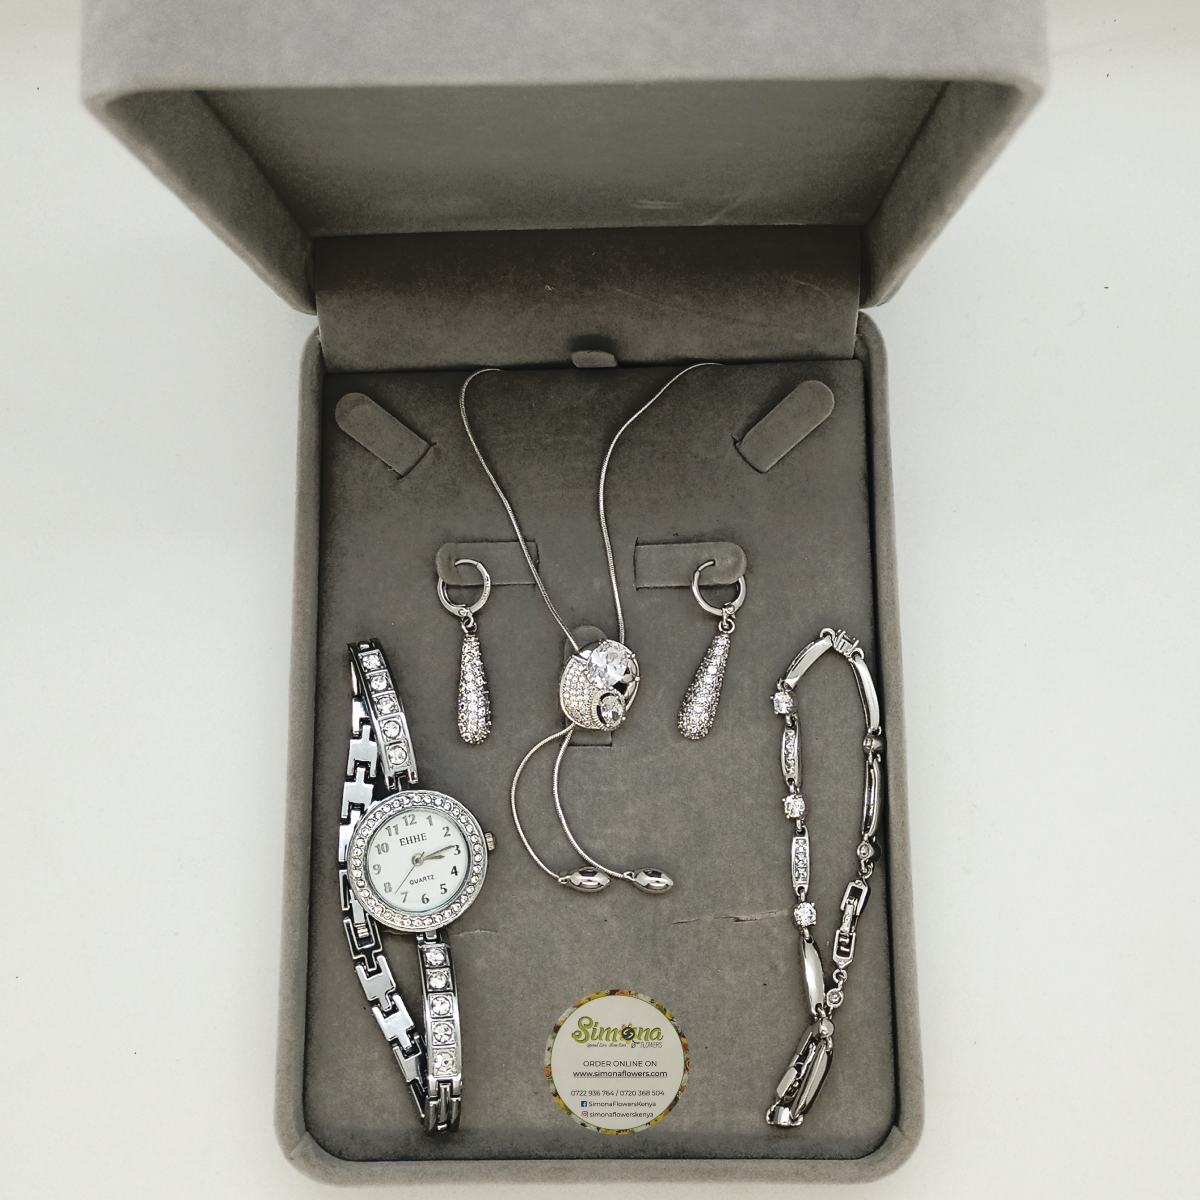 Remarkable chain and watch set